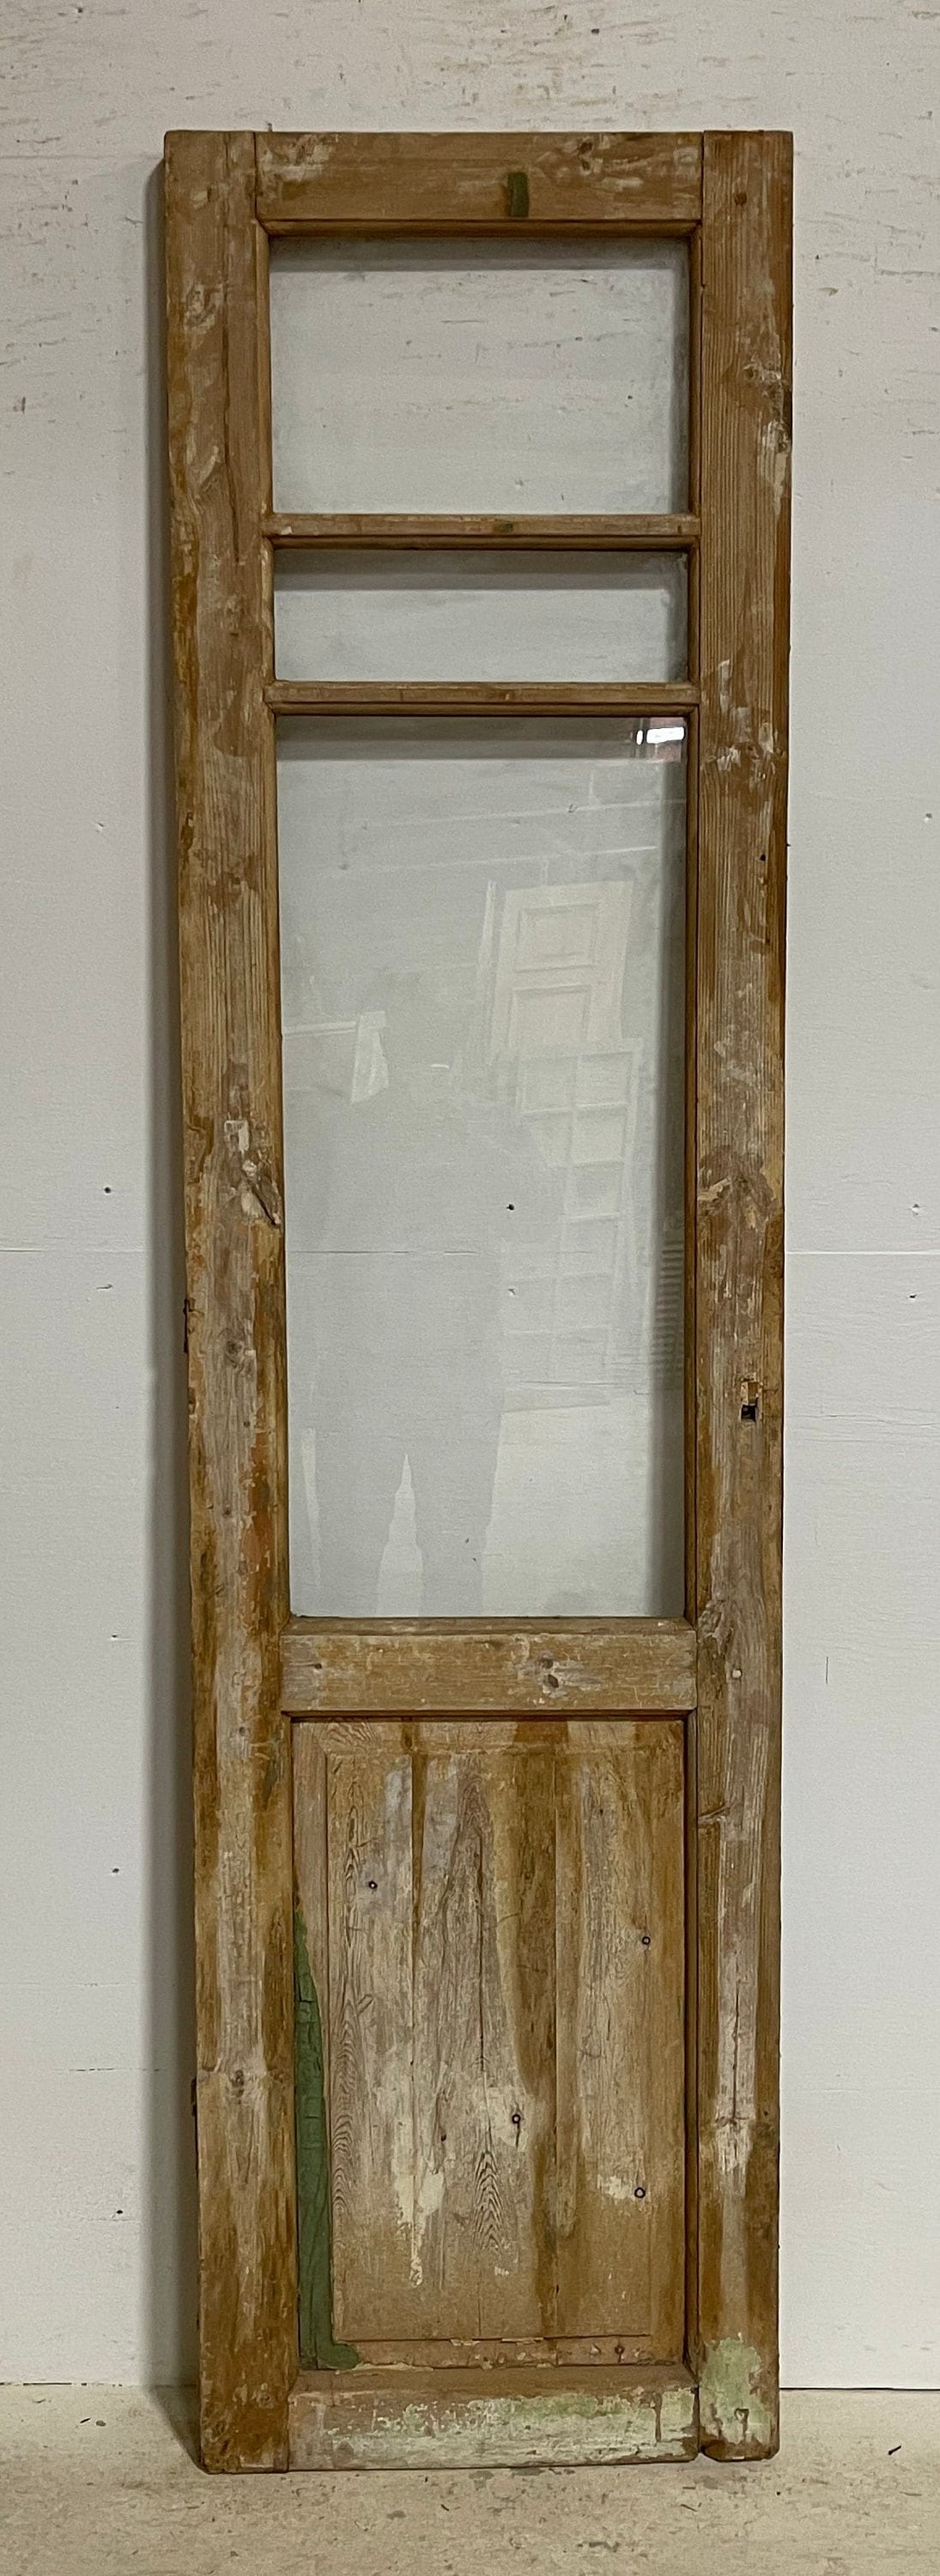 Antique French panel door with glass (89.25x23) G1405s